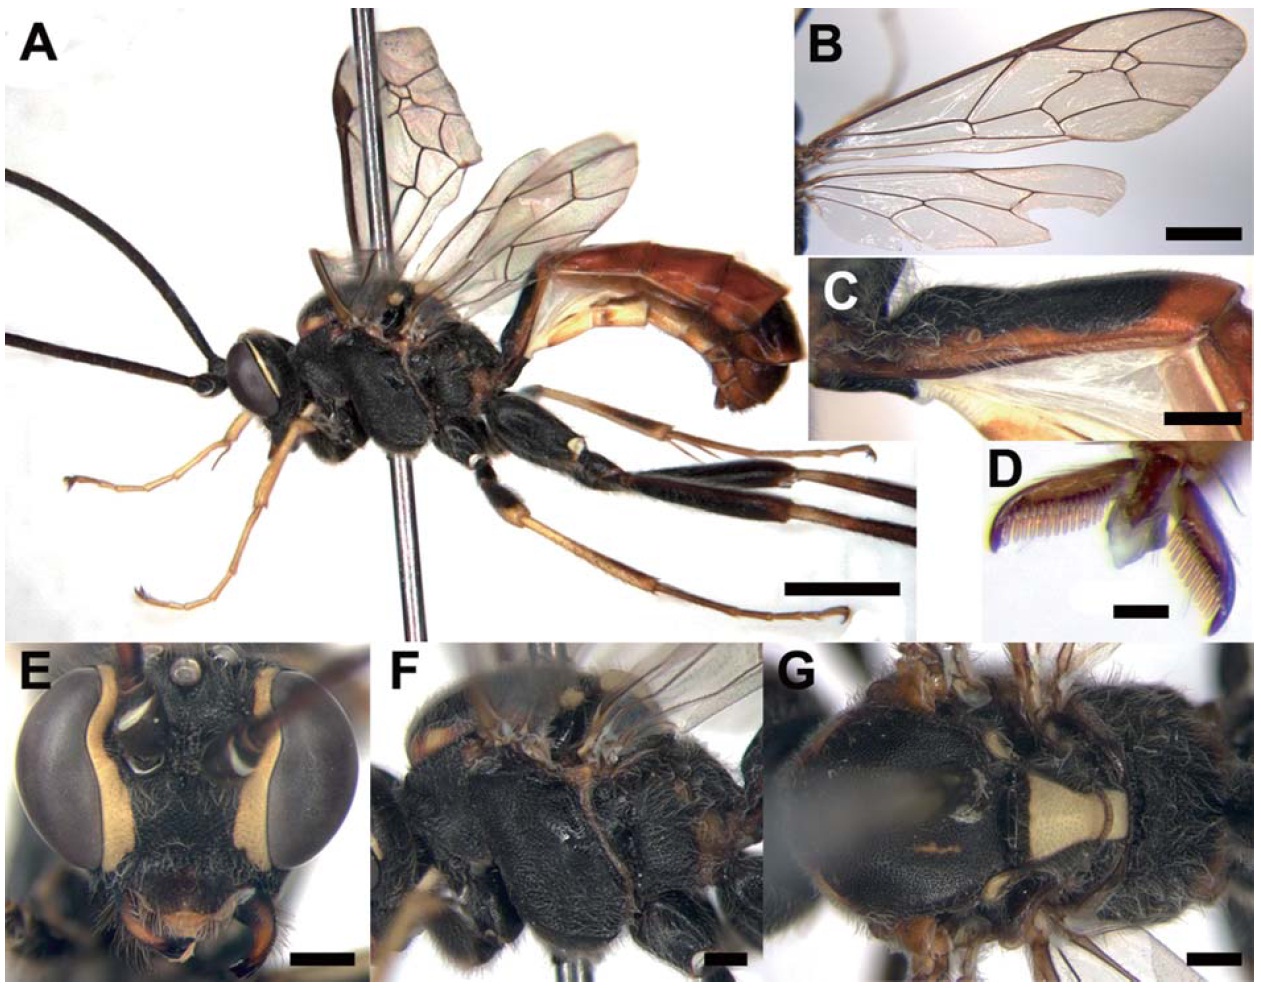 Rynchobanchus minomensis (Uchida, 1933), female. A, Lateral habitus; B, Fore wing; C, Petiole in lateral; D, Tarsal claw; E, Head in anterior; F, Mesosoma in lateral; G, Mesosoma in dorsal. Scale bars: A, B=2 mm, C, E-G=0.5 mm, D=0.1 mm.